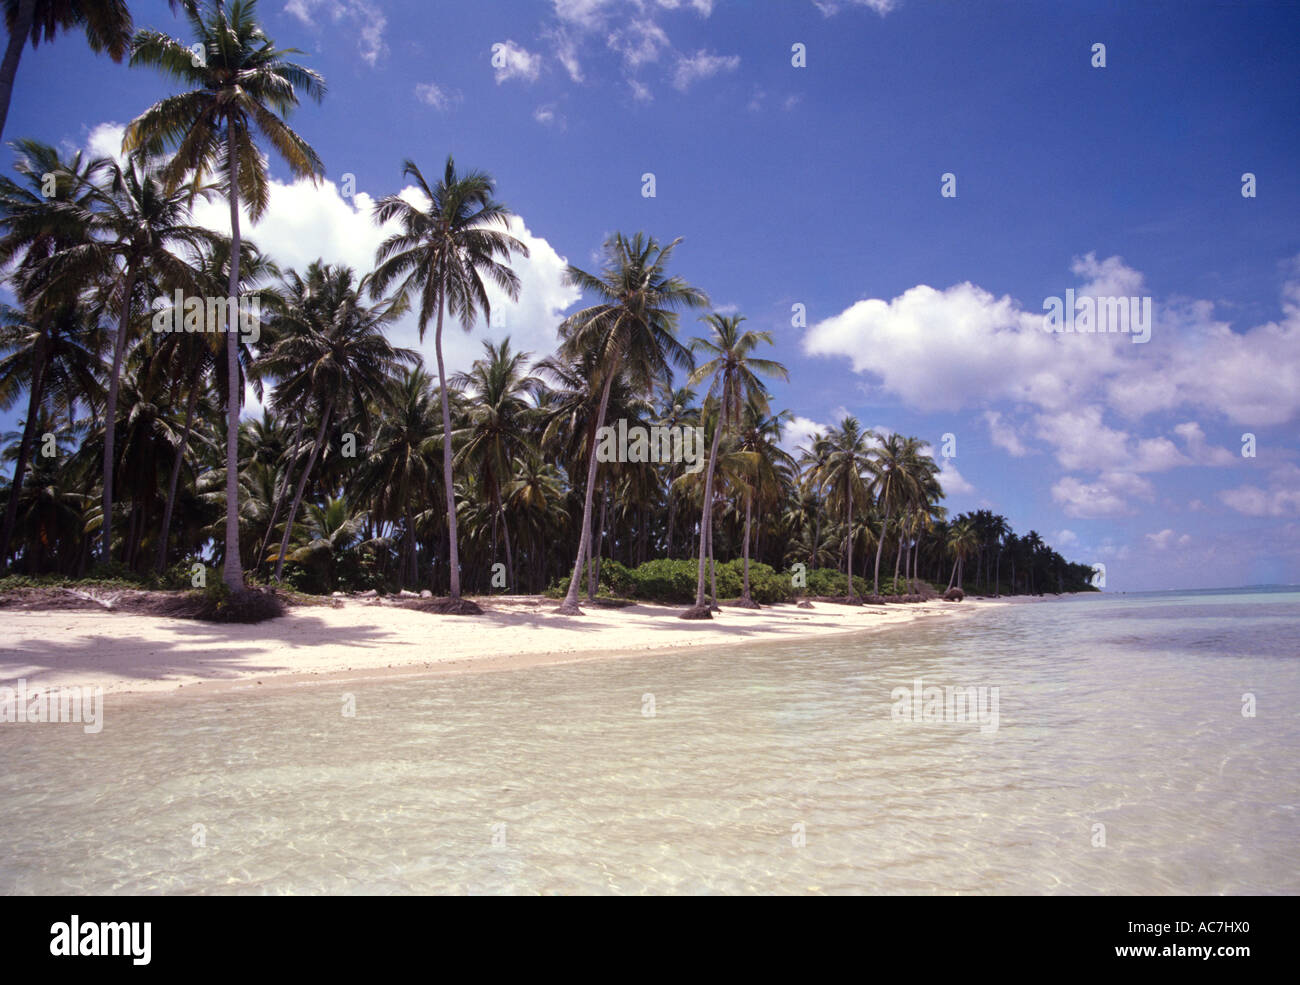 CLEAR WATER AND SAND OF LAKSHADWEEP Stock Photo - Alamy